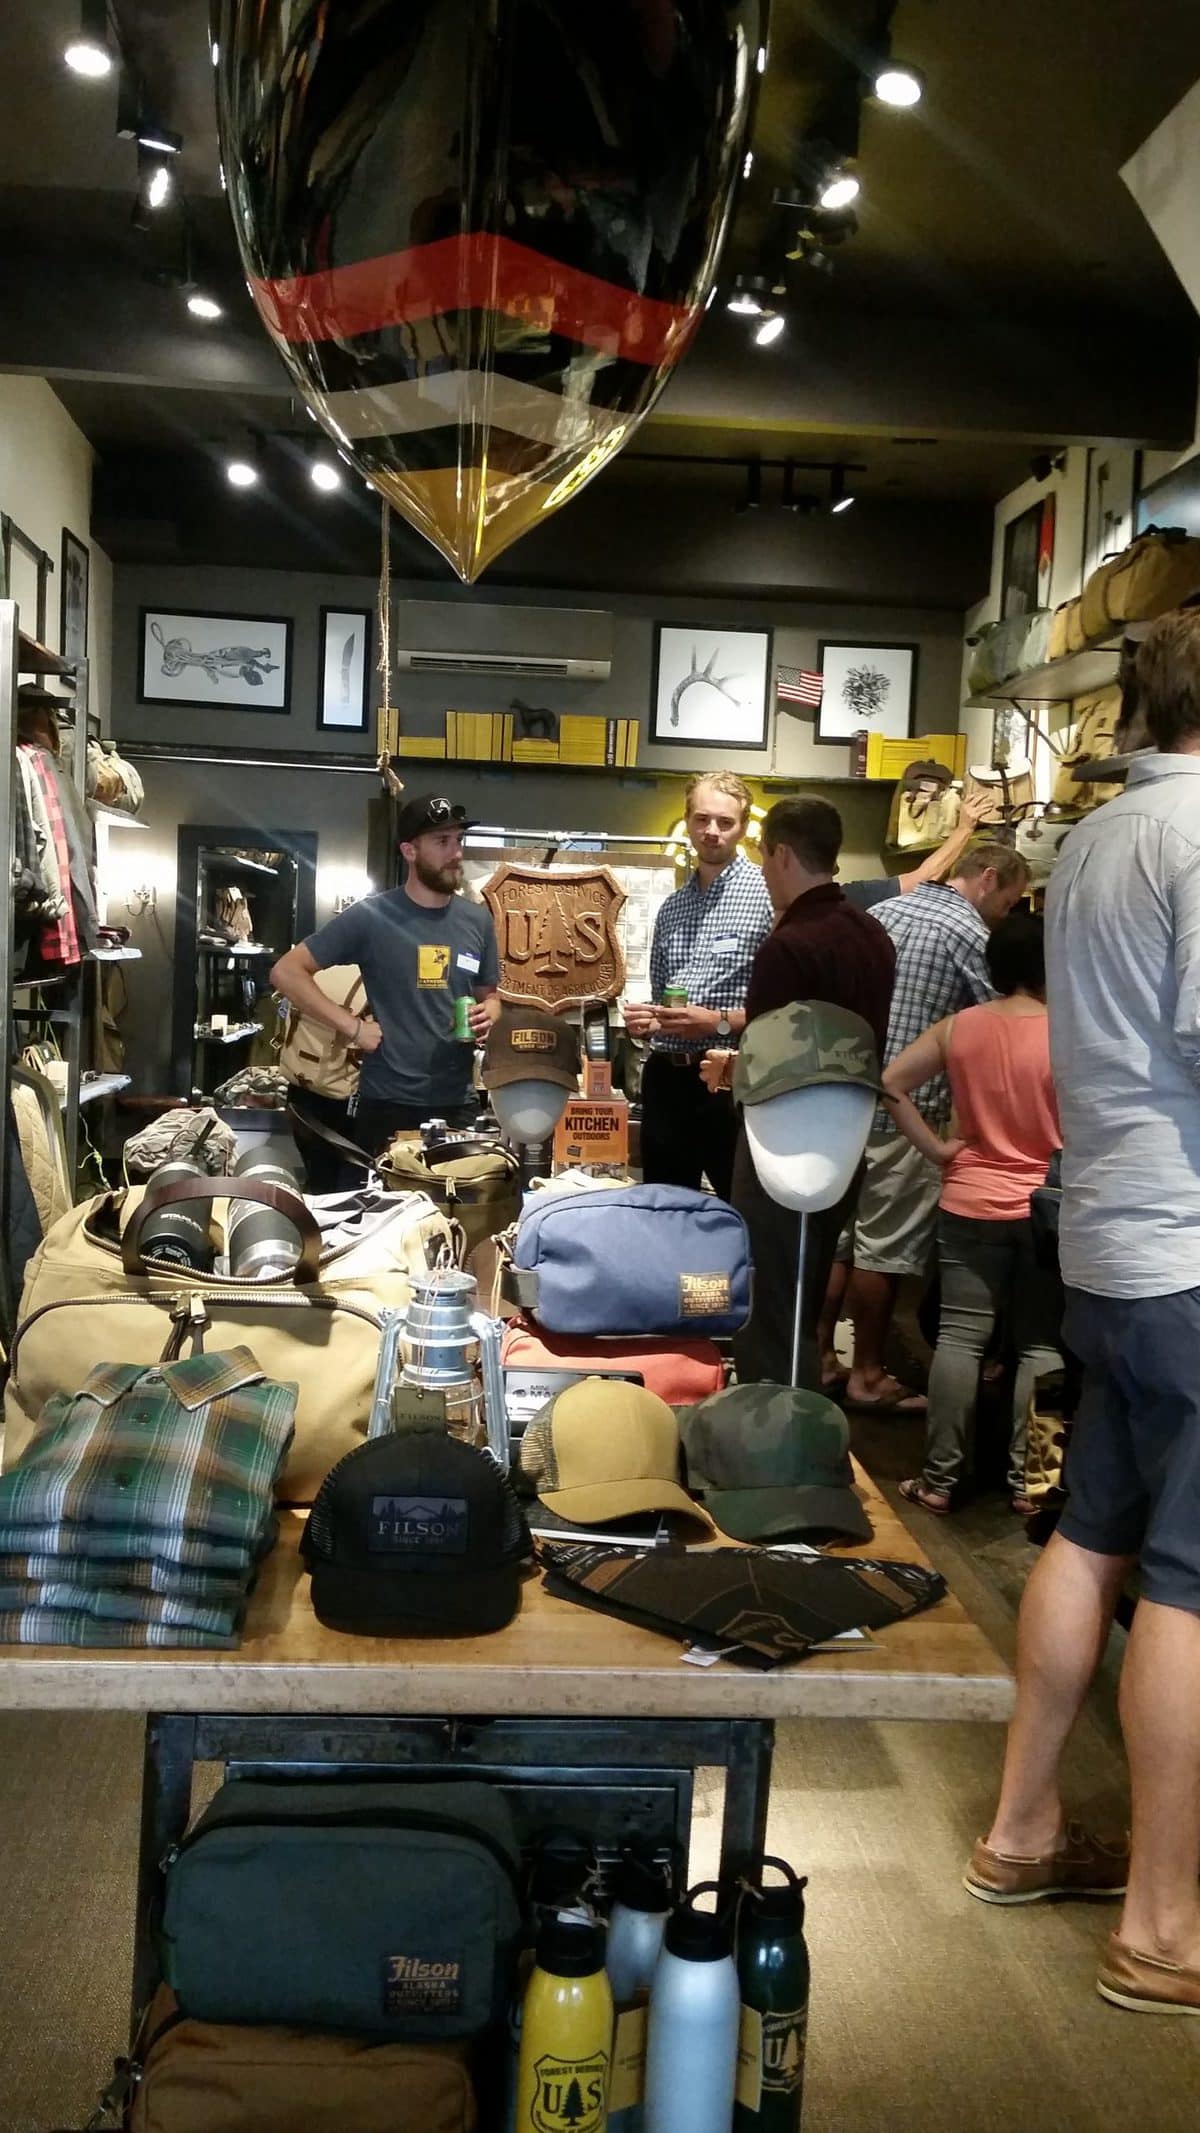 D.C.: Fly Fishing with Filson - Mappy Hour Blog